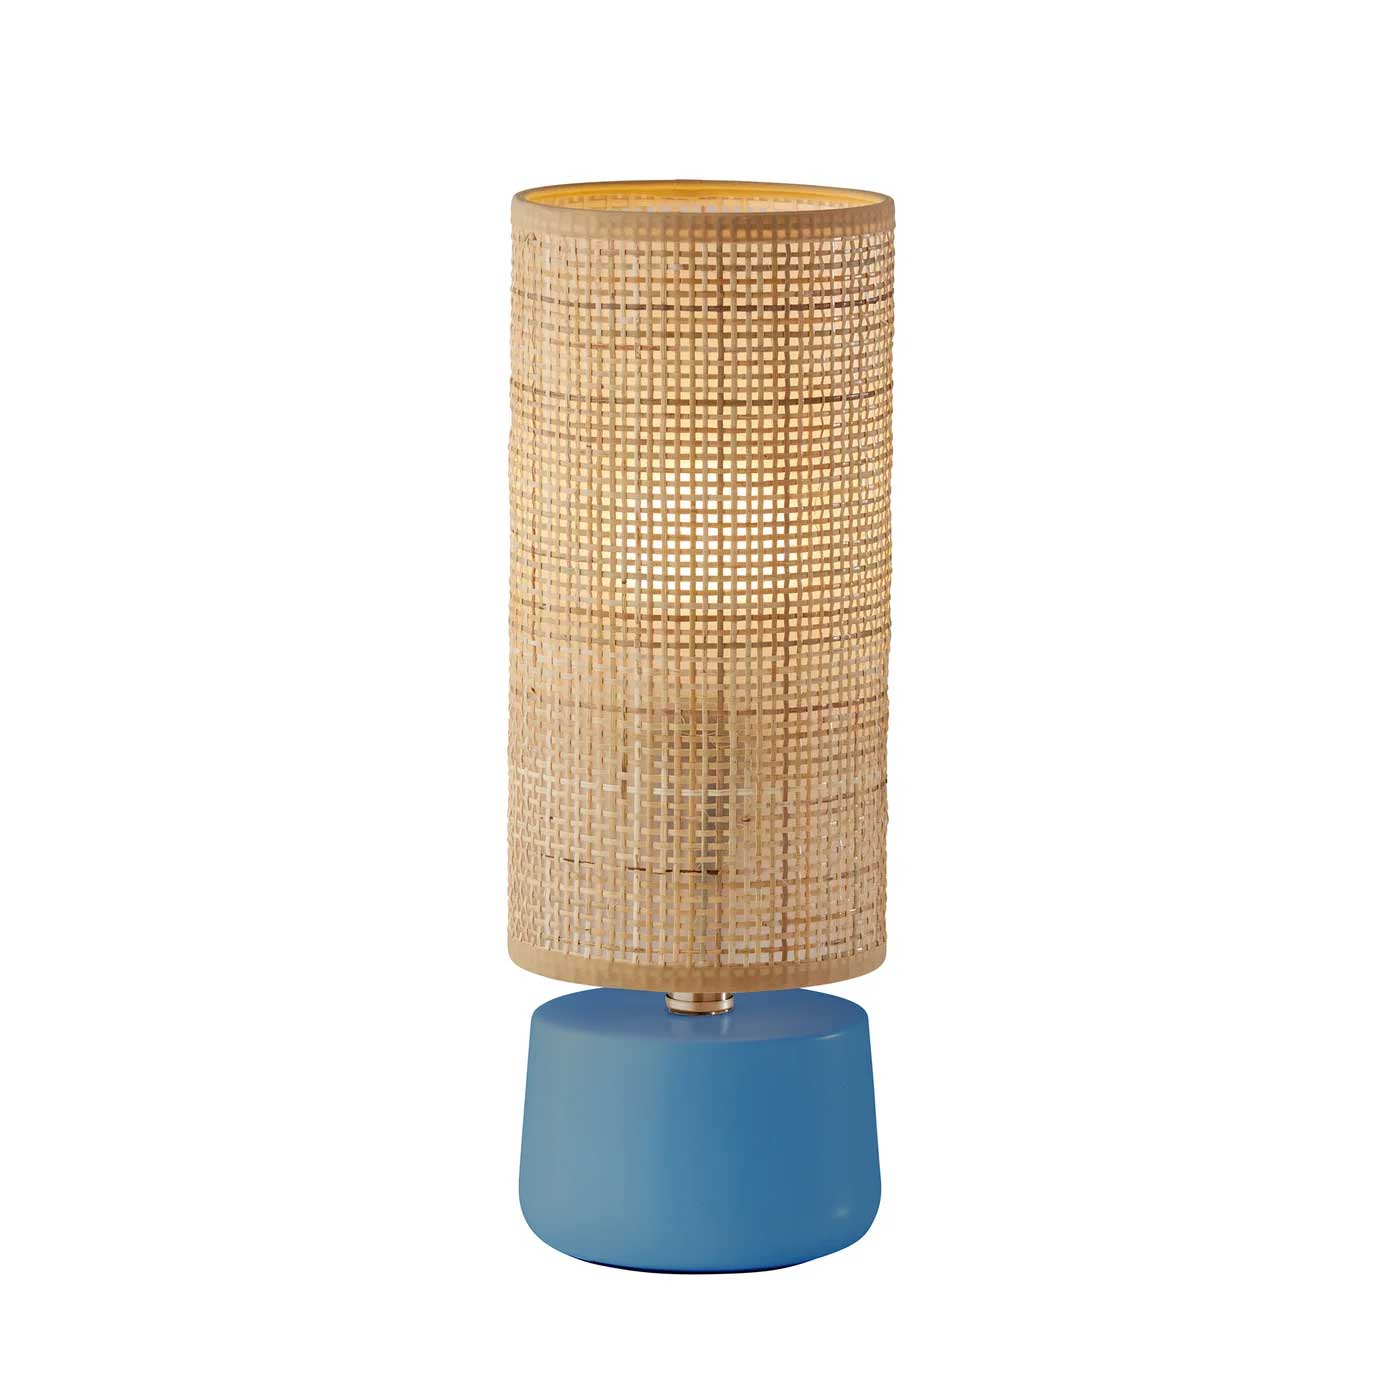 SHEFFIELD Table lamp - 3730-07 | ADESSO